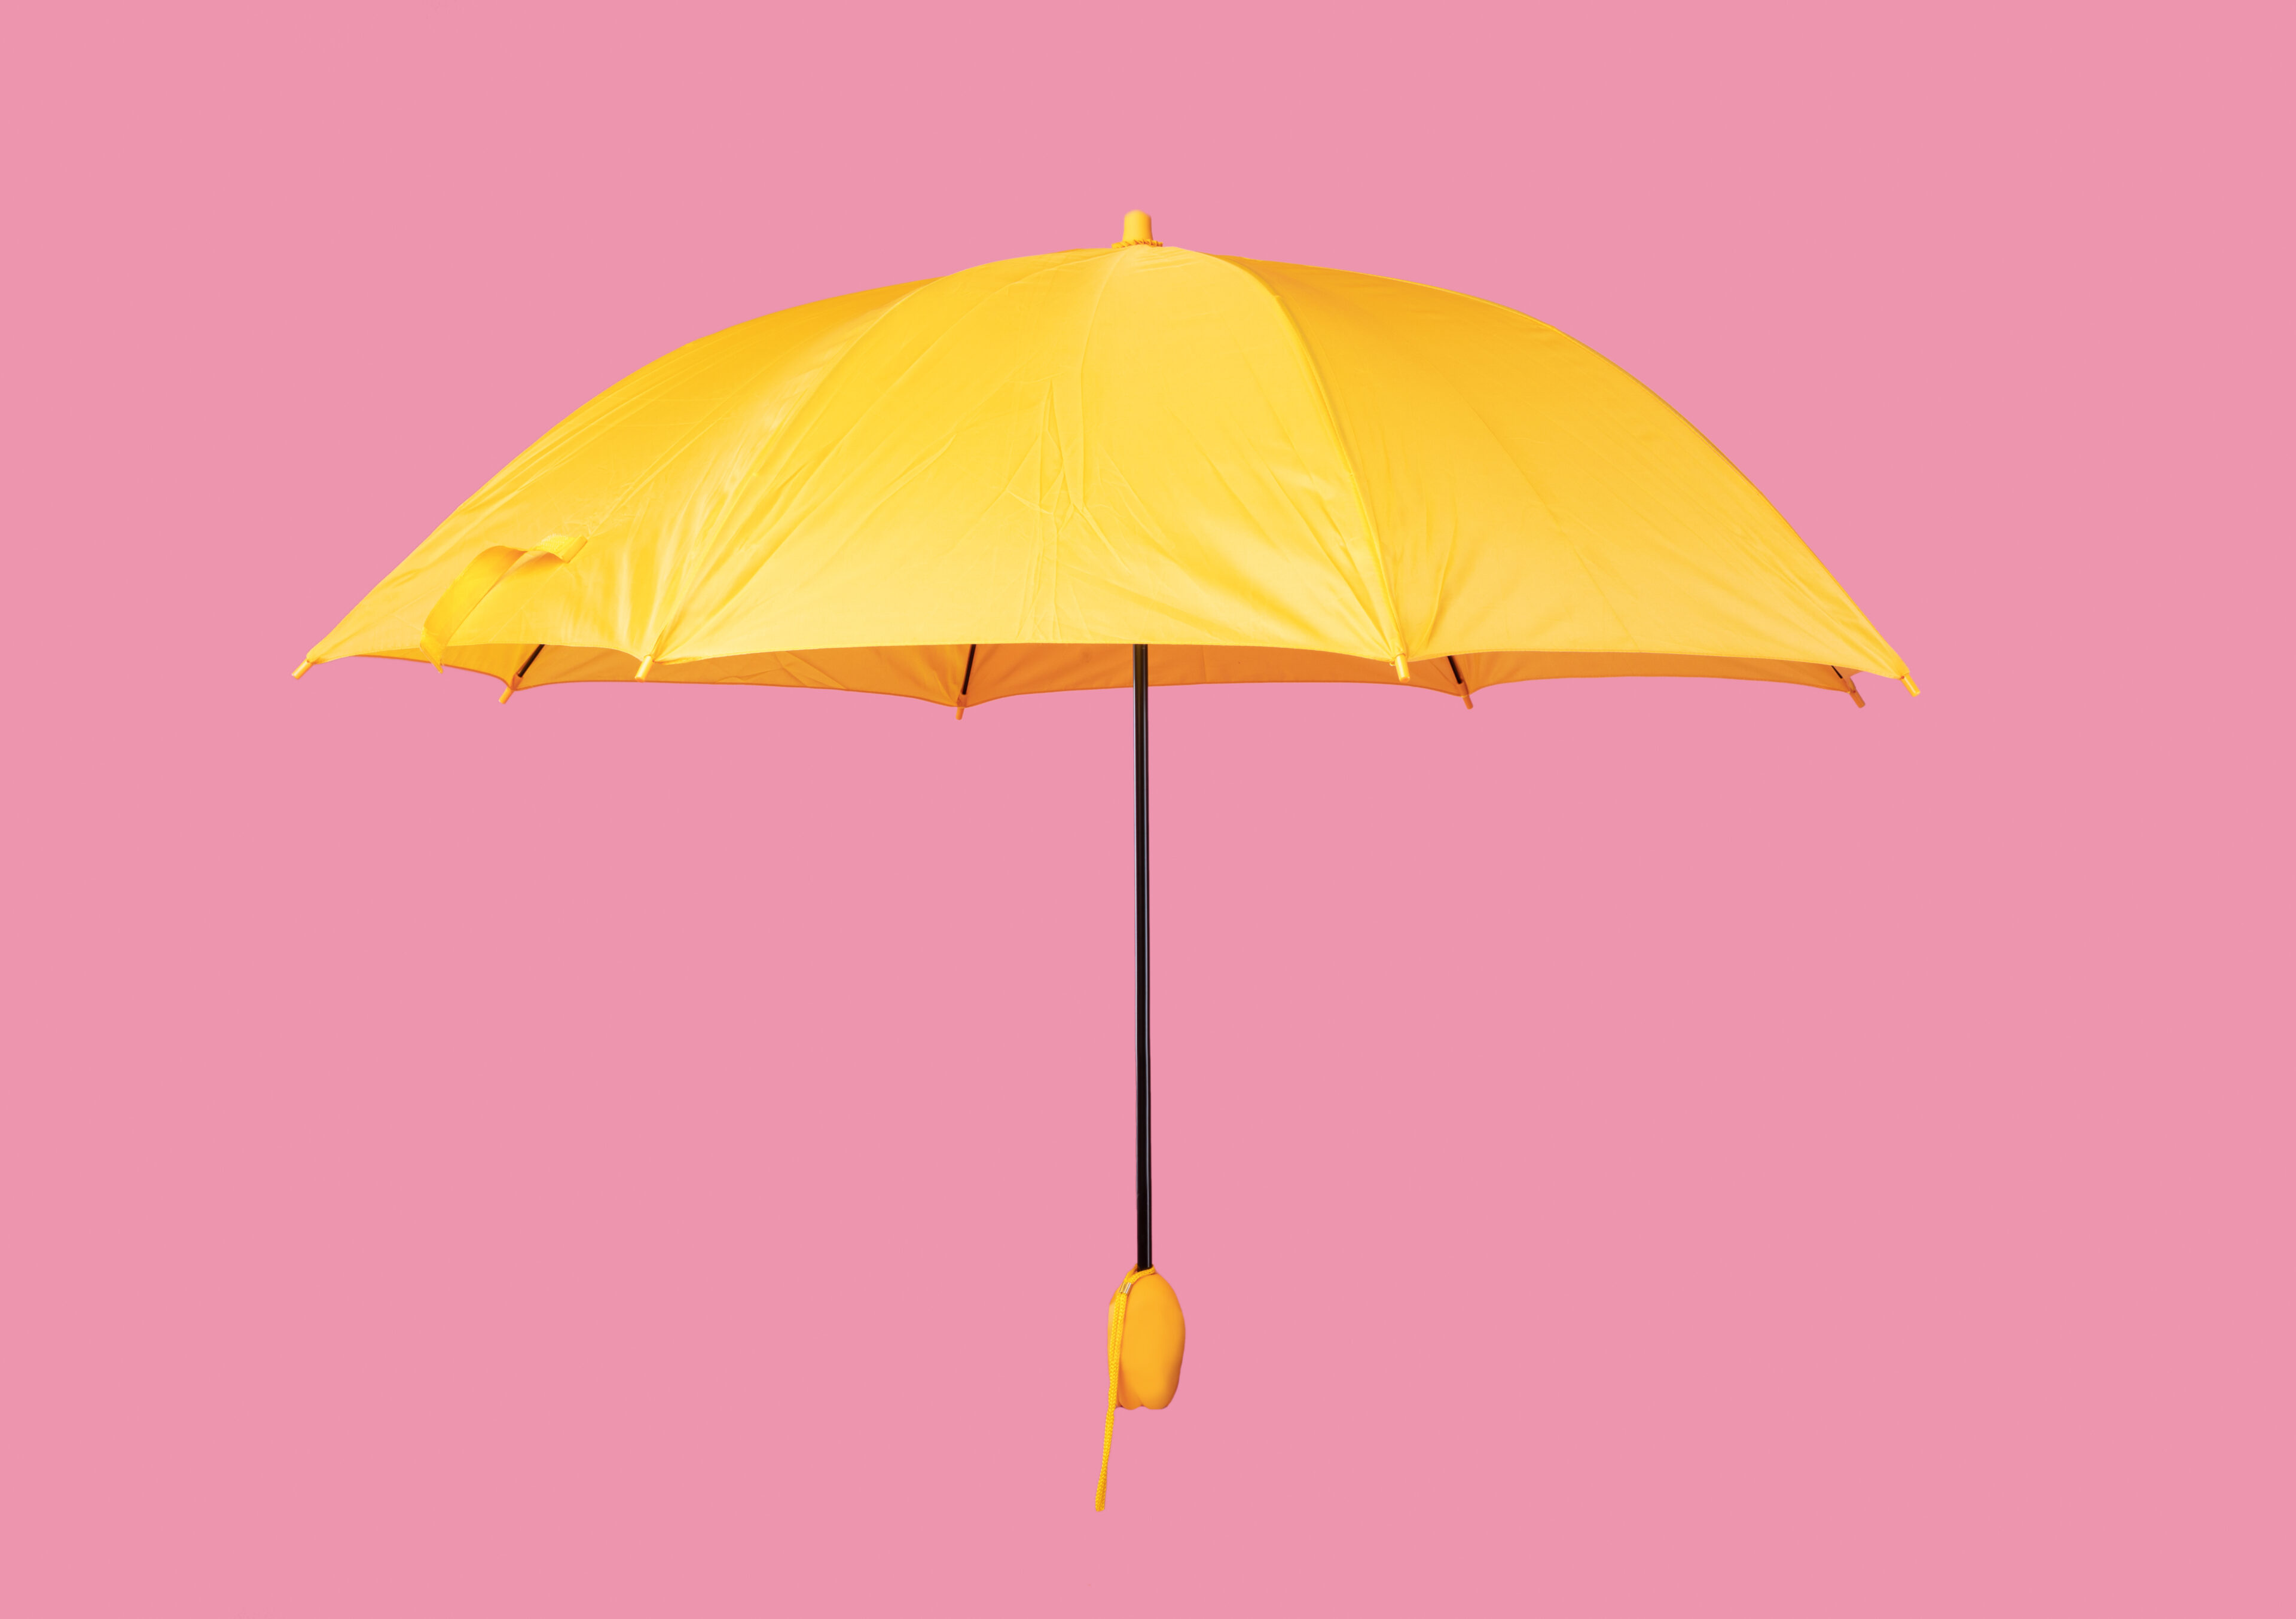 Umbrella is a protector which helps keep your hair away from UV